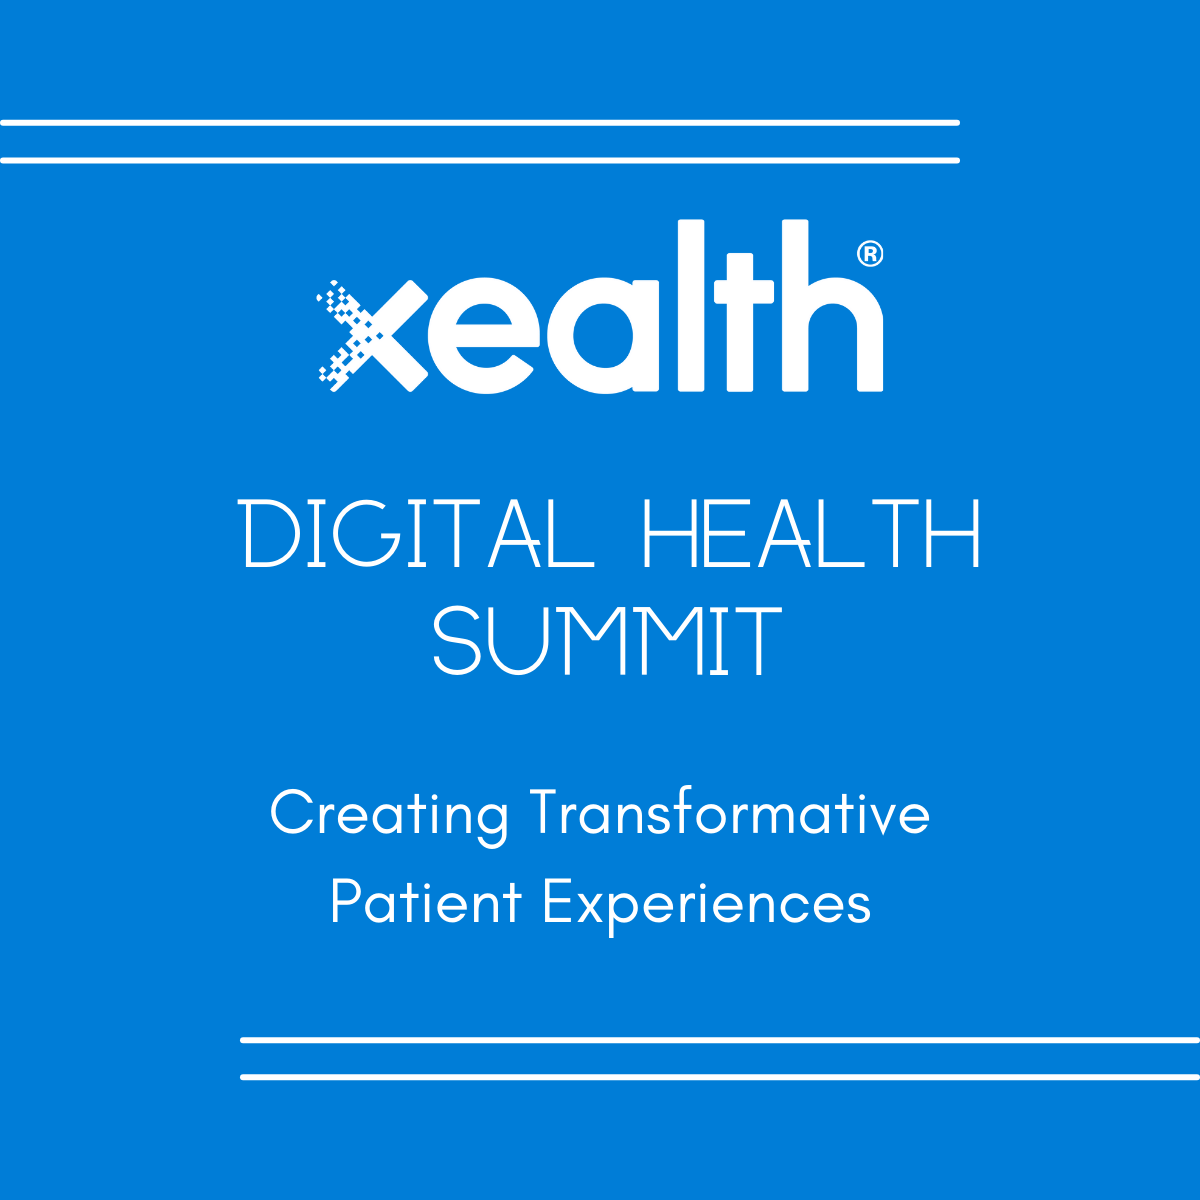 Creating Transformative Patient Experiences: Highlights from Xealth’s Digital Health Summit